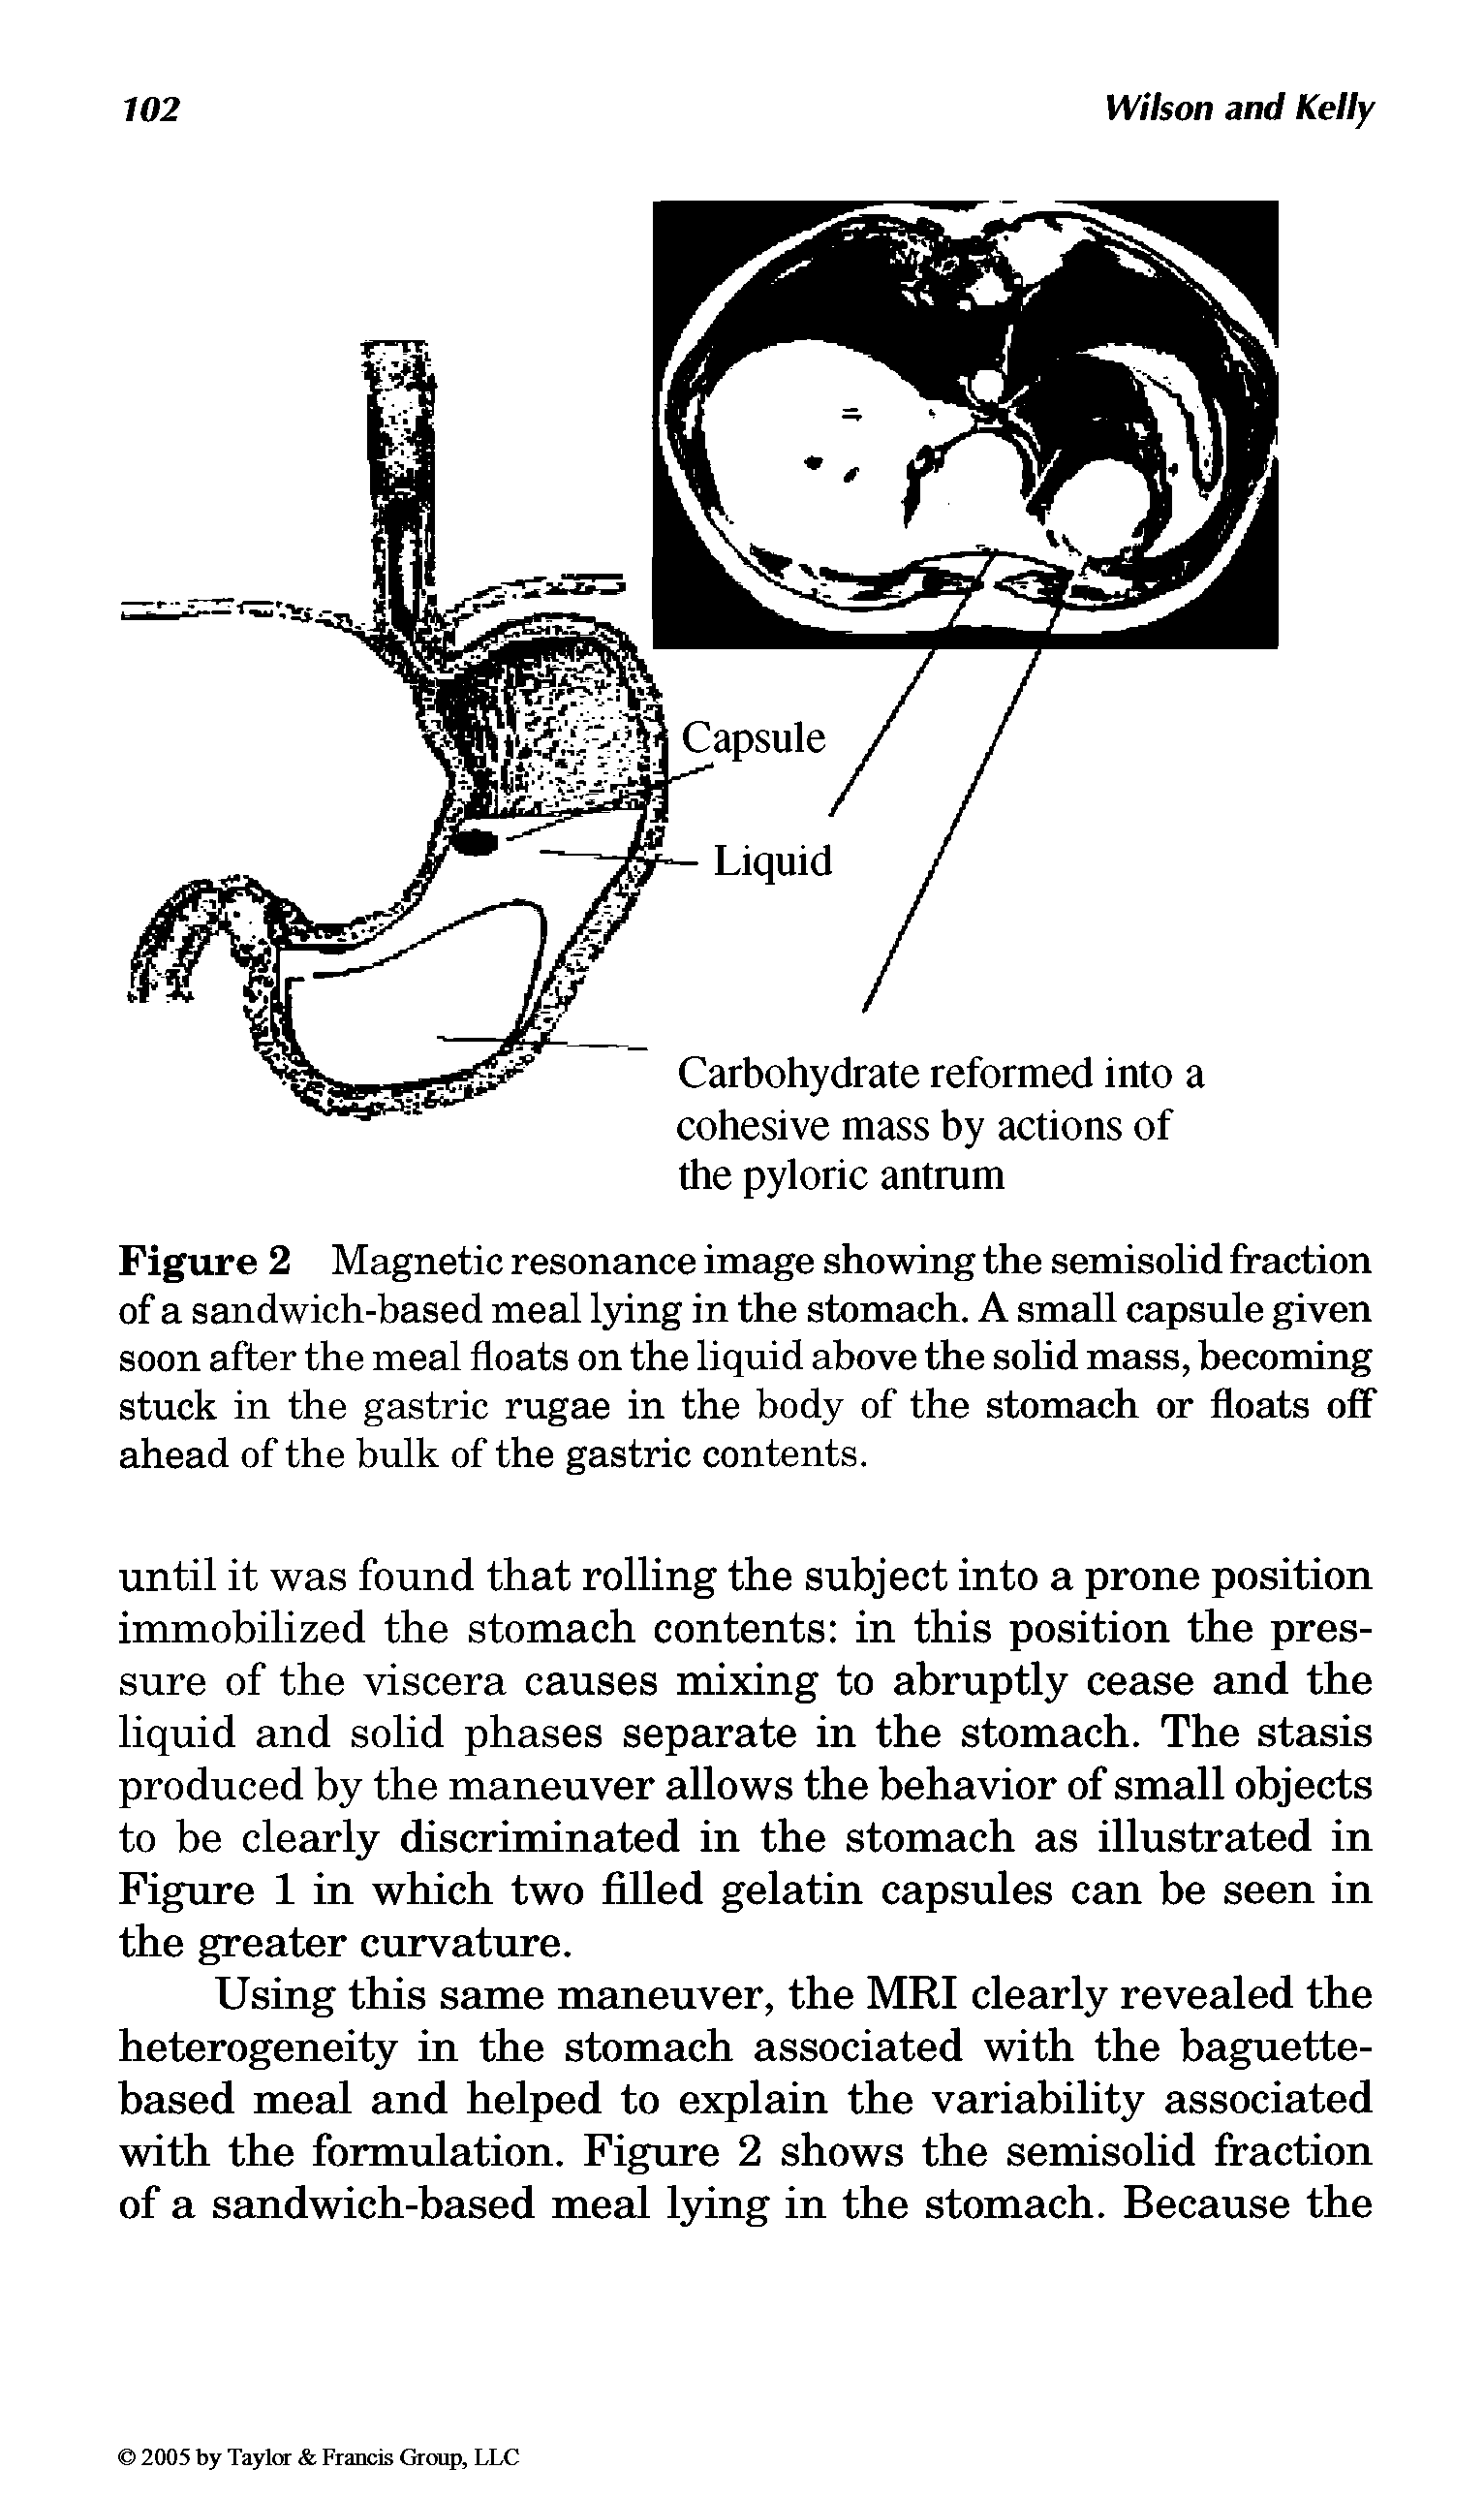 Figure 2 Magnetic resonance image showing the semisolid fraction of a sandwich-based meal lying in the stomach. A small capsule given soon after the meal floats on the liquid above the solid mass, becoming stuck in the gastric rugae in the body of the stomach or floats off ahead of the bulk of the gastric contents.